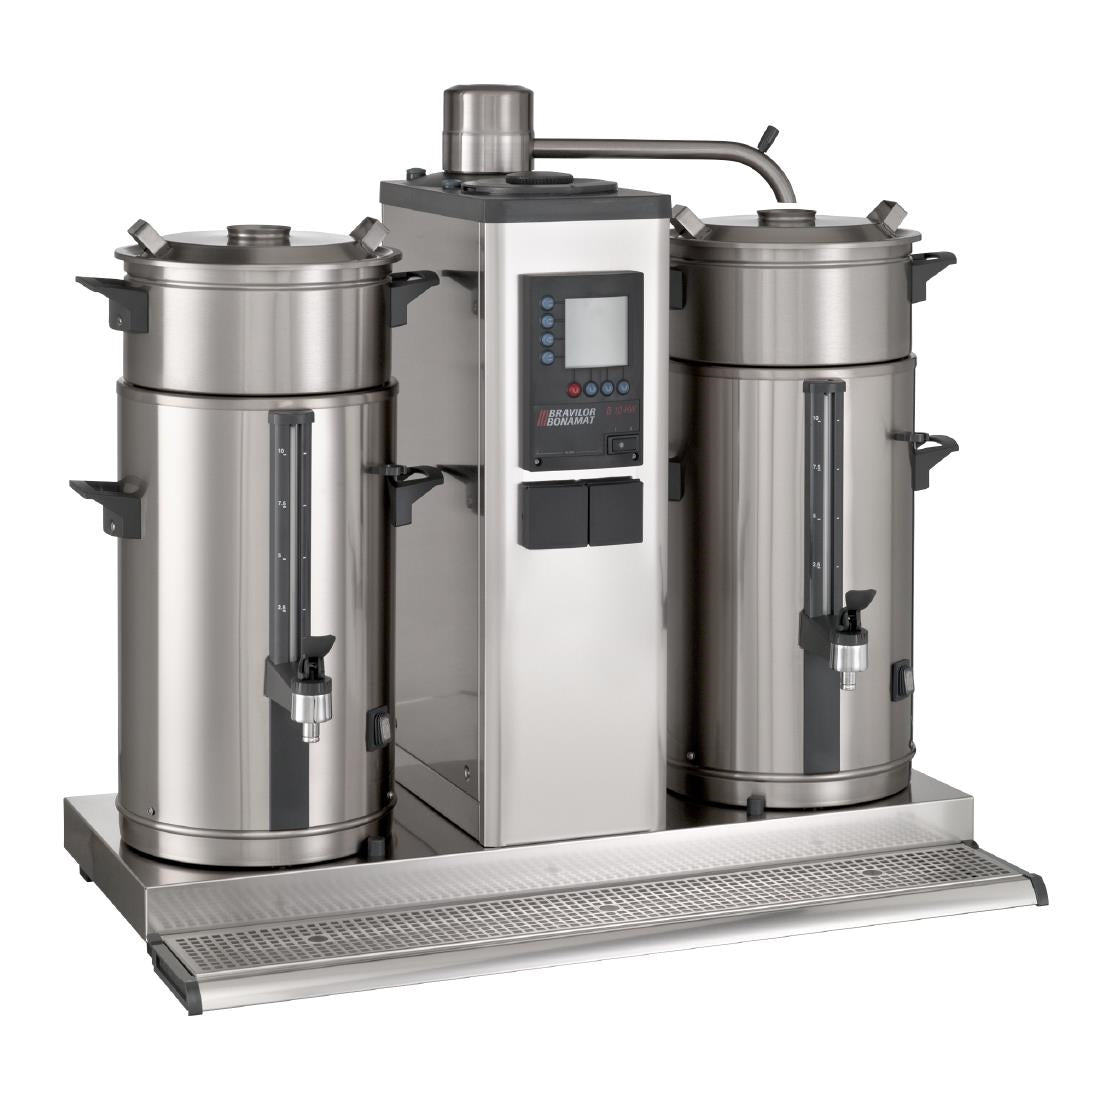 DC678-1P Bravilor B10 Bulk Coffee Brewer with 2x10Ltr Coffee Urns Single Phase JD Catering Equipment Solutions Ltd